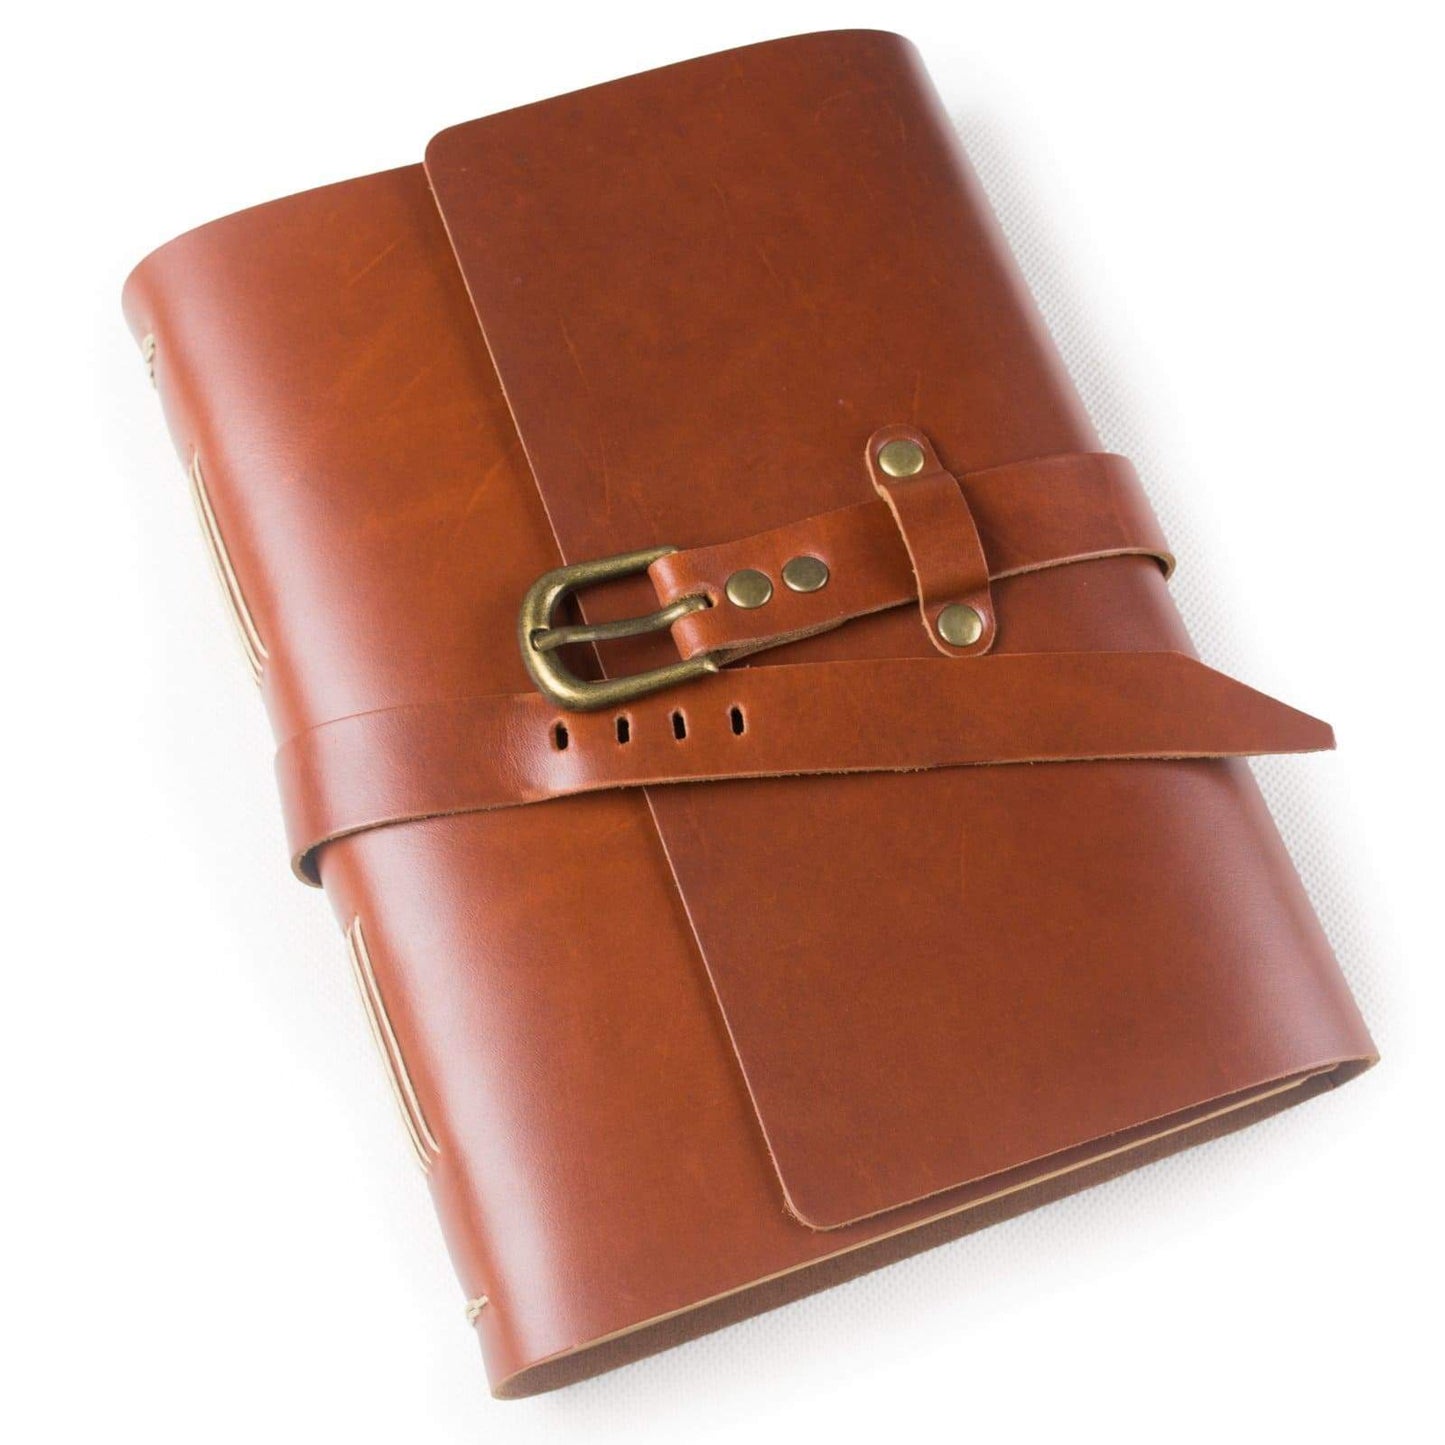 Buy now ancicraft classic genuine leather journal with strap buckle handmade a5 lined craft paper red brown with gift box red brown a55 8x8 3inch lined craft paper